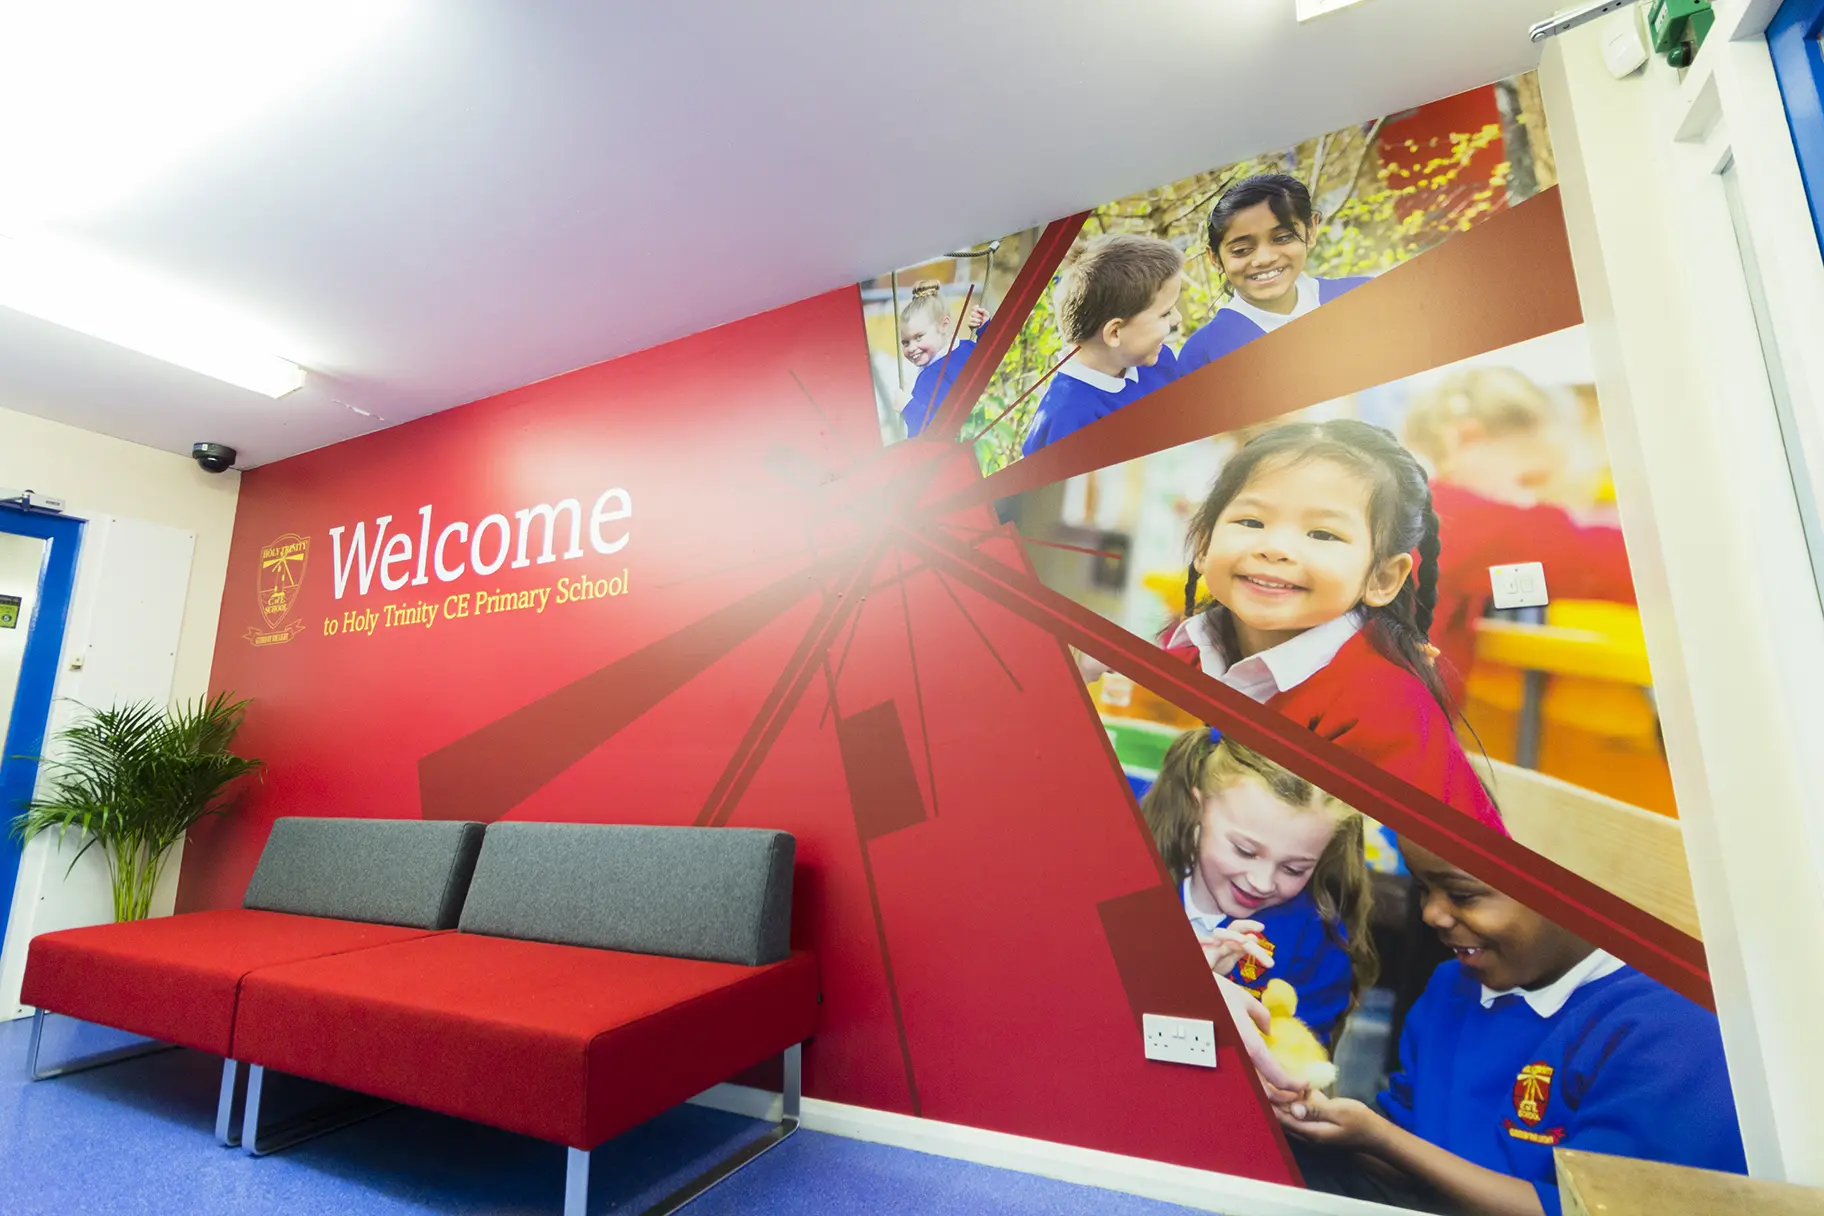 Holy Trinity School branding for welcome walls wall art